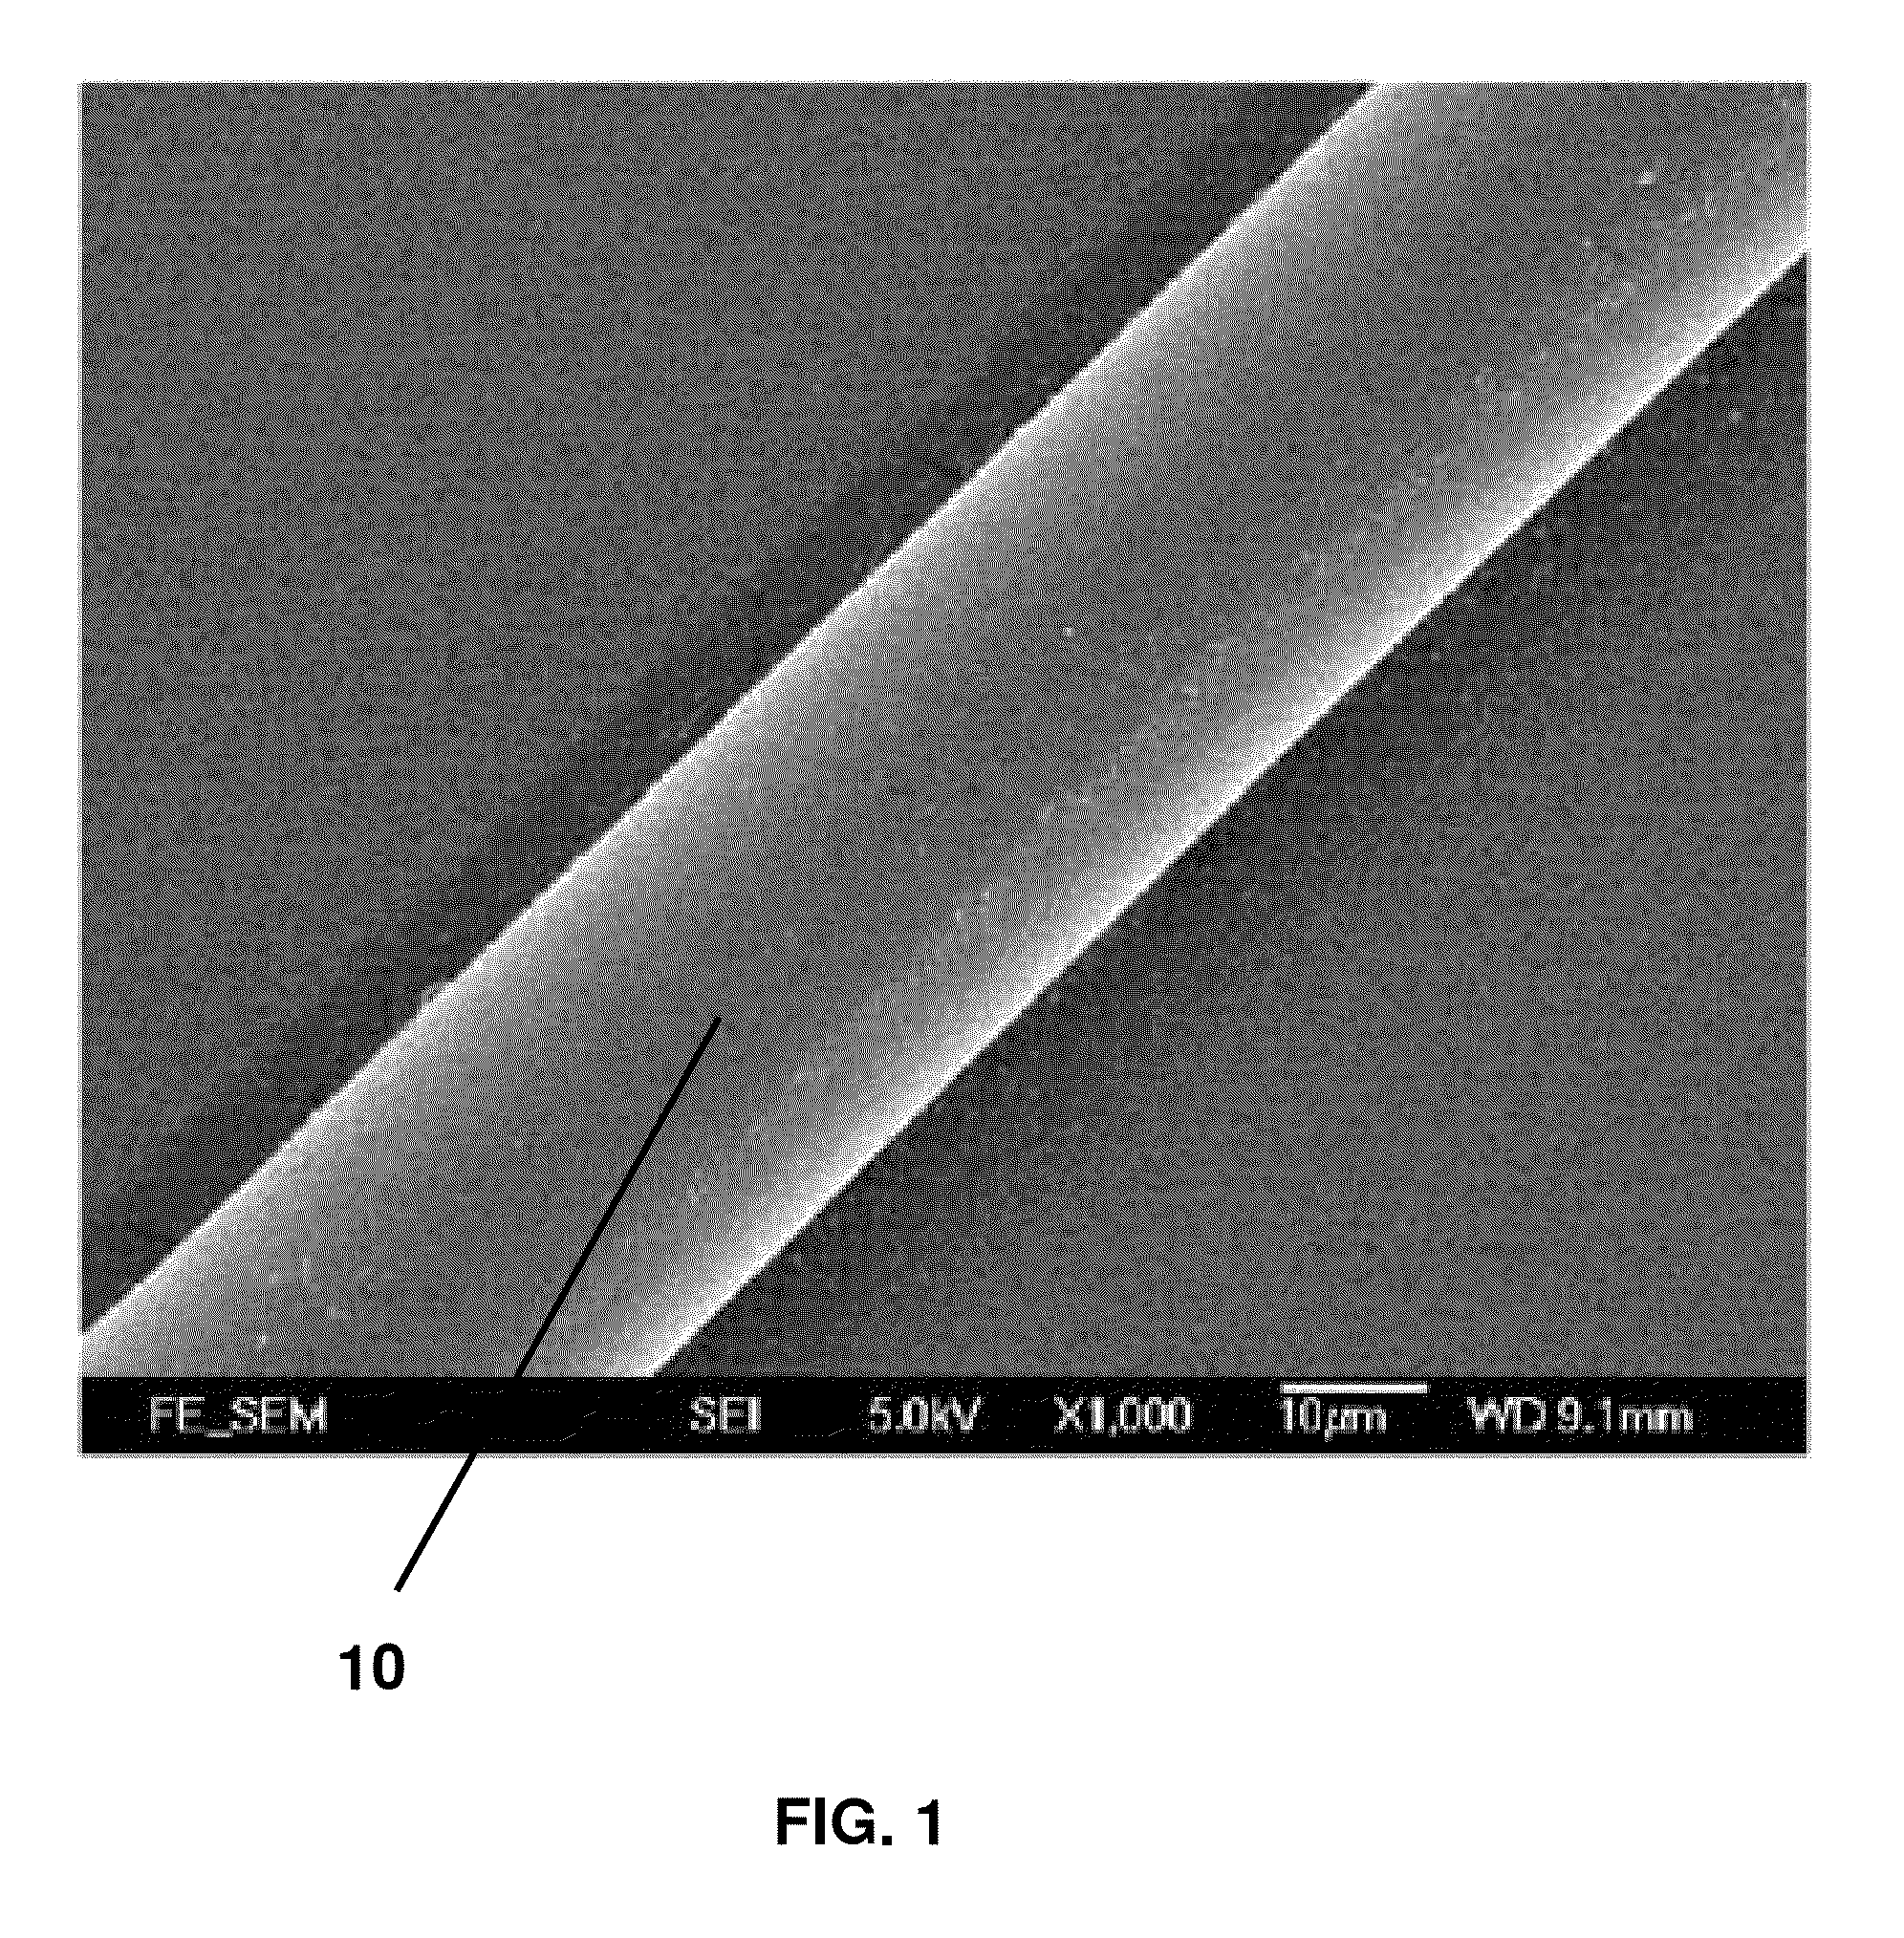 Stretchable electrical interconnect and method of making same